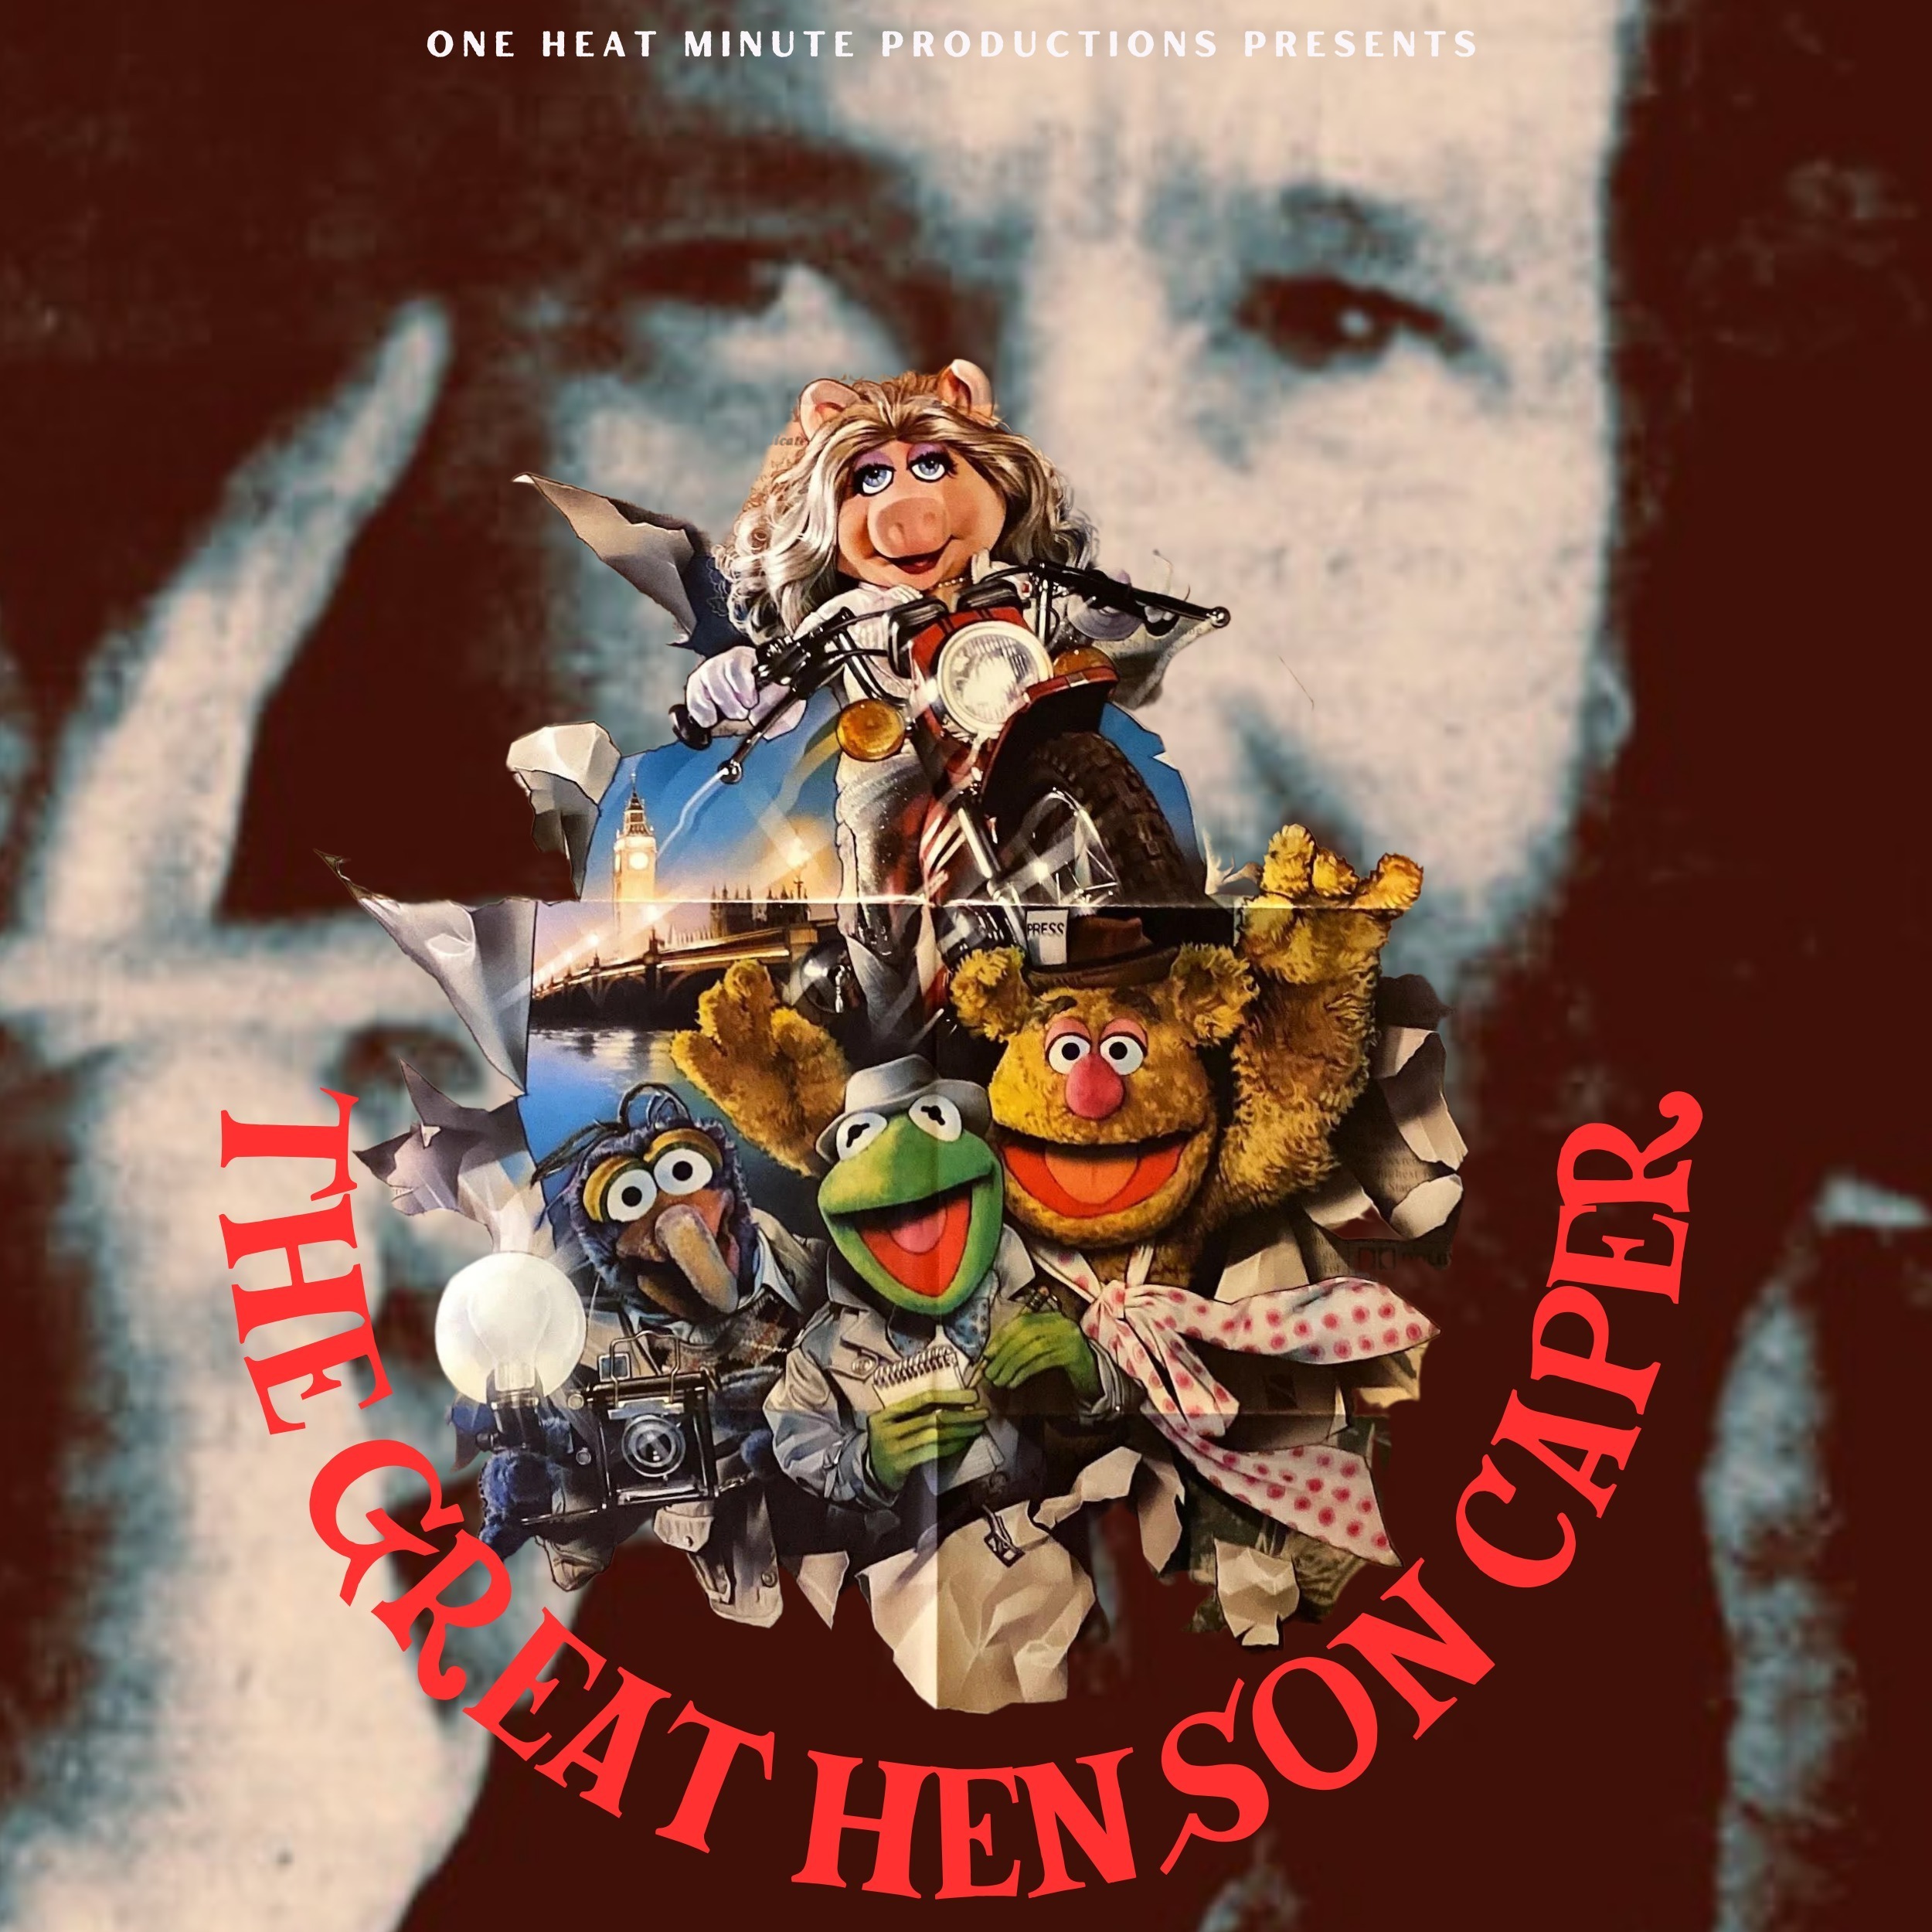 THE GREAT HENSON CAPER PART 4: THE MUPPET MOVIE